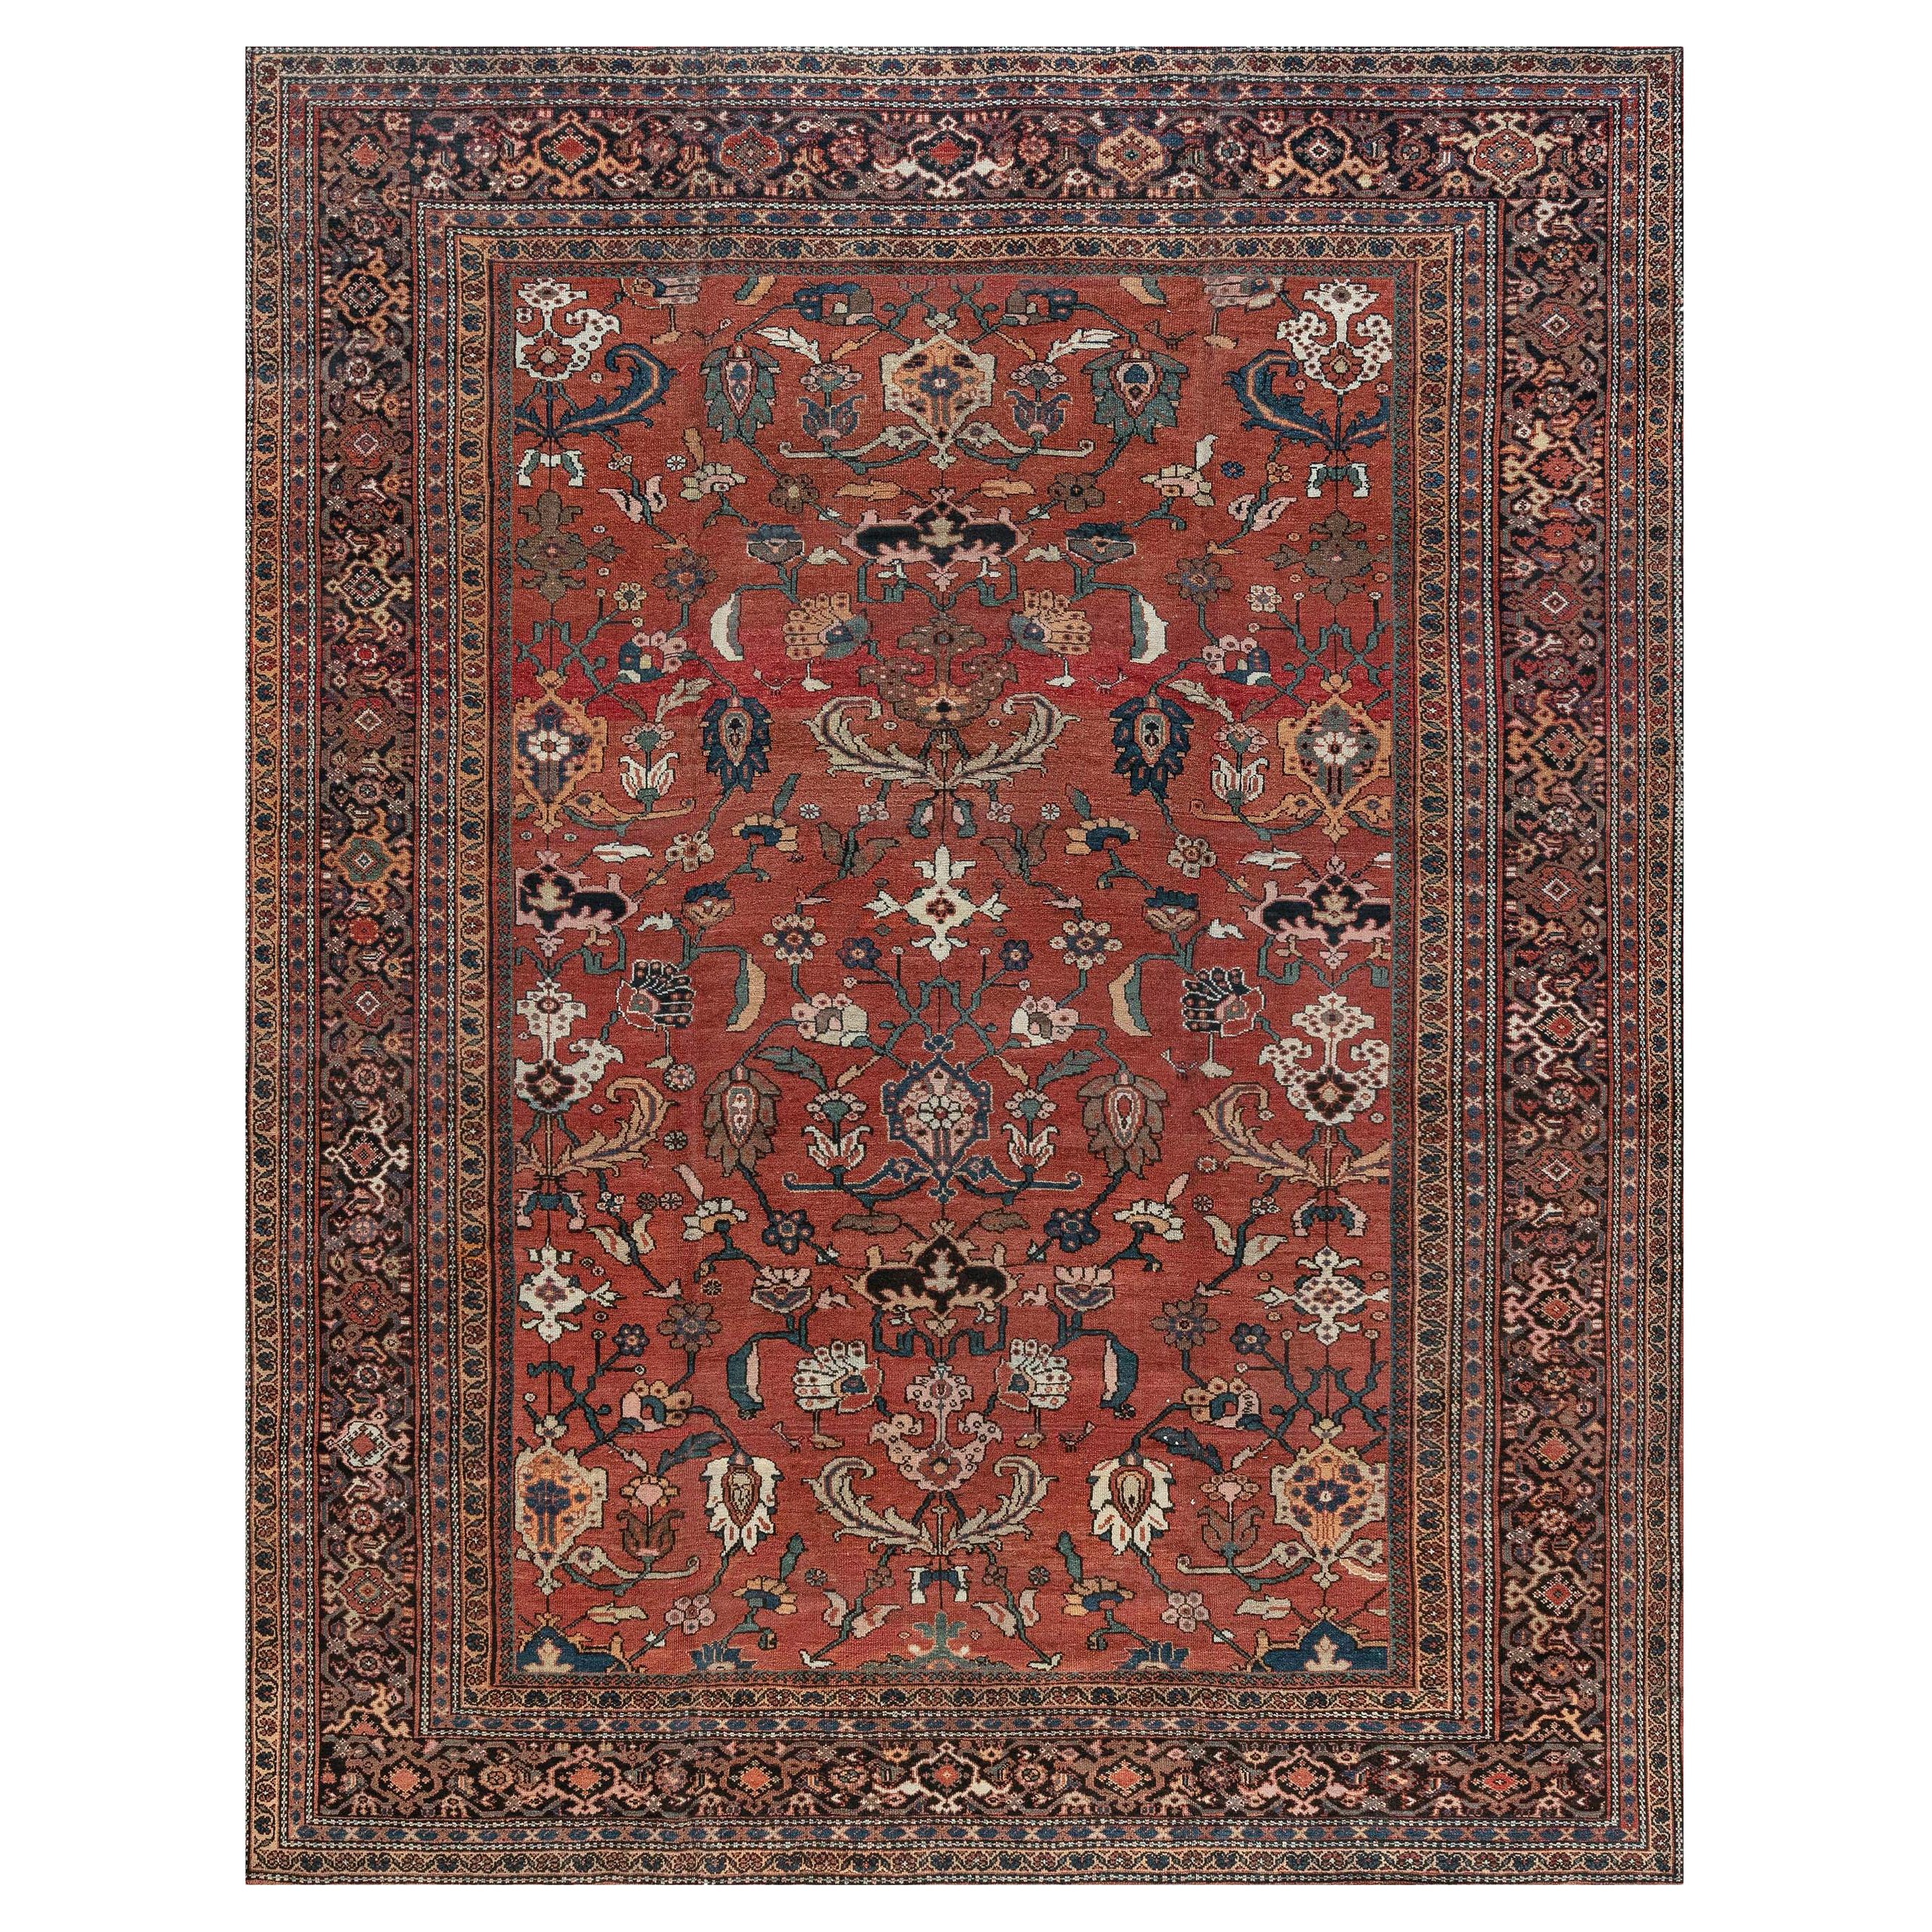 Authentic 19th Century Persian Sultanabad Wool Rug